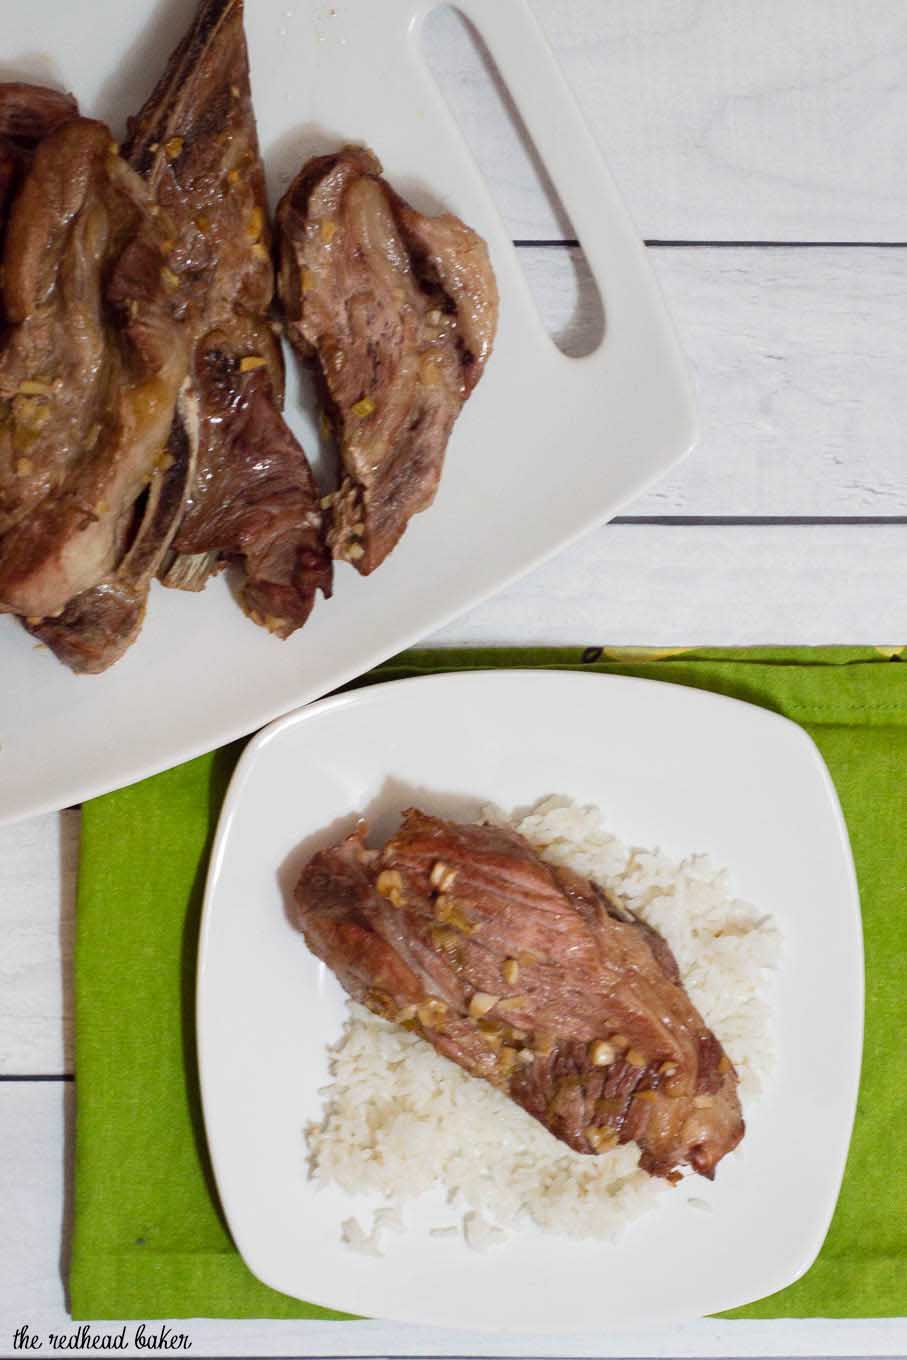 Nothing says summer more than pork ribs marinated in Hawaiian flavors like pineapple juice, soy sauce and ginger. This recipe will easily feeds the crowd at your next summer get-together. #SummerRefreshment #Peapod